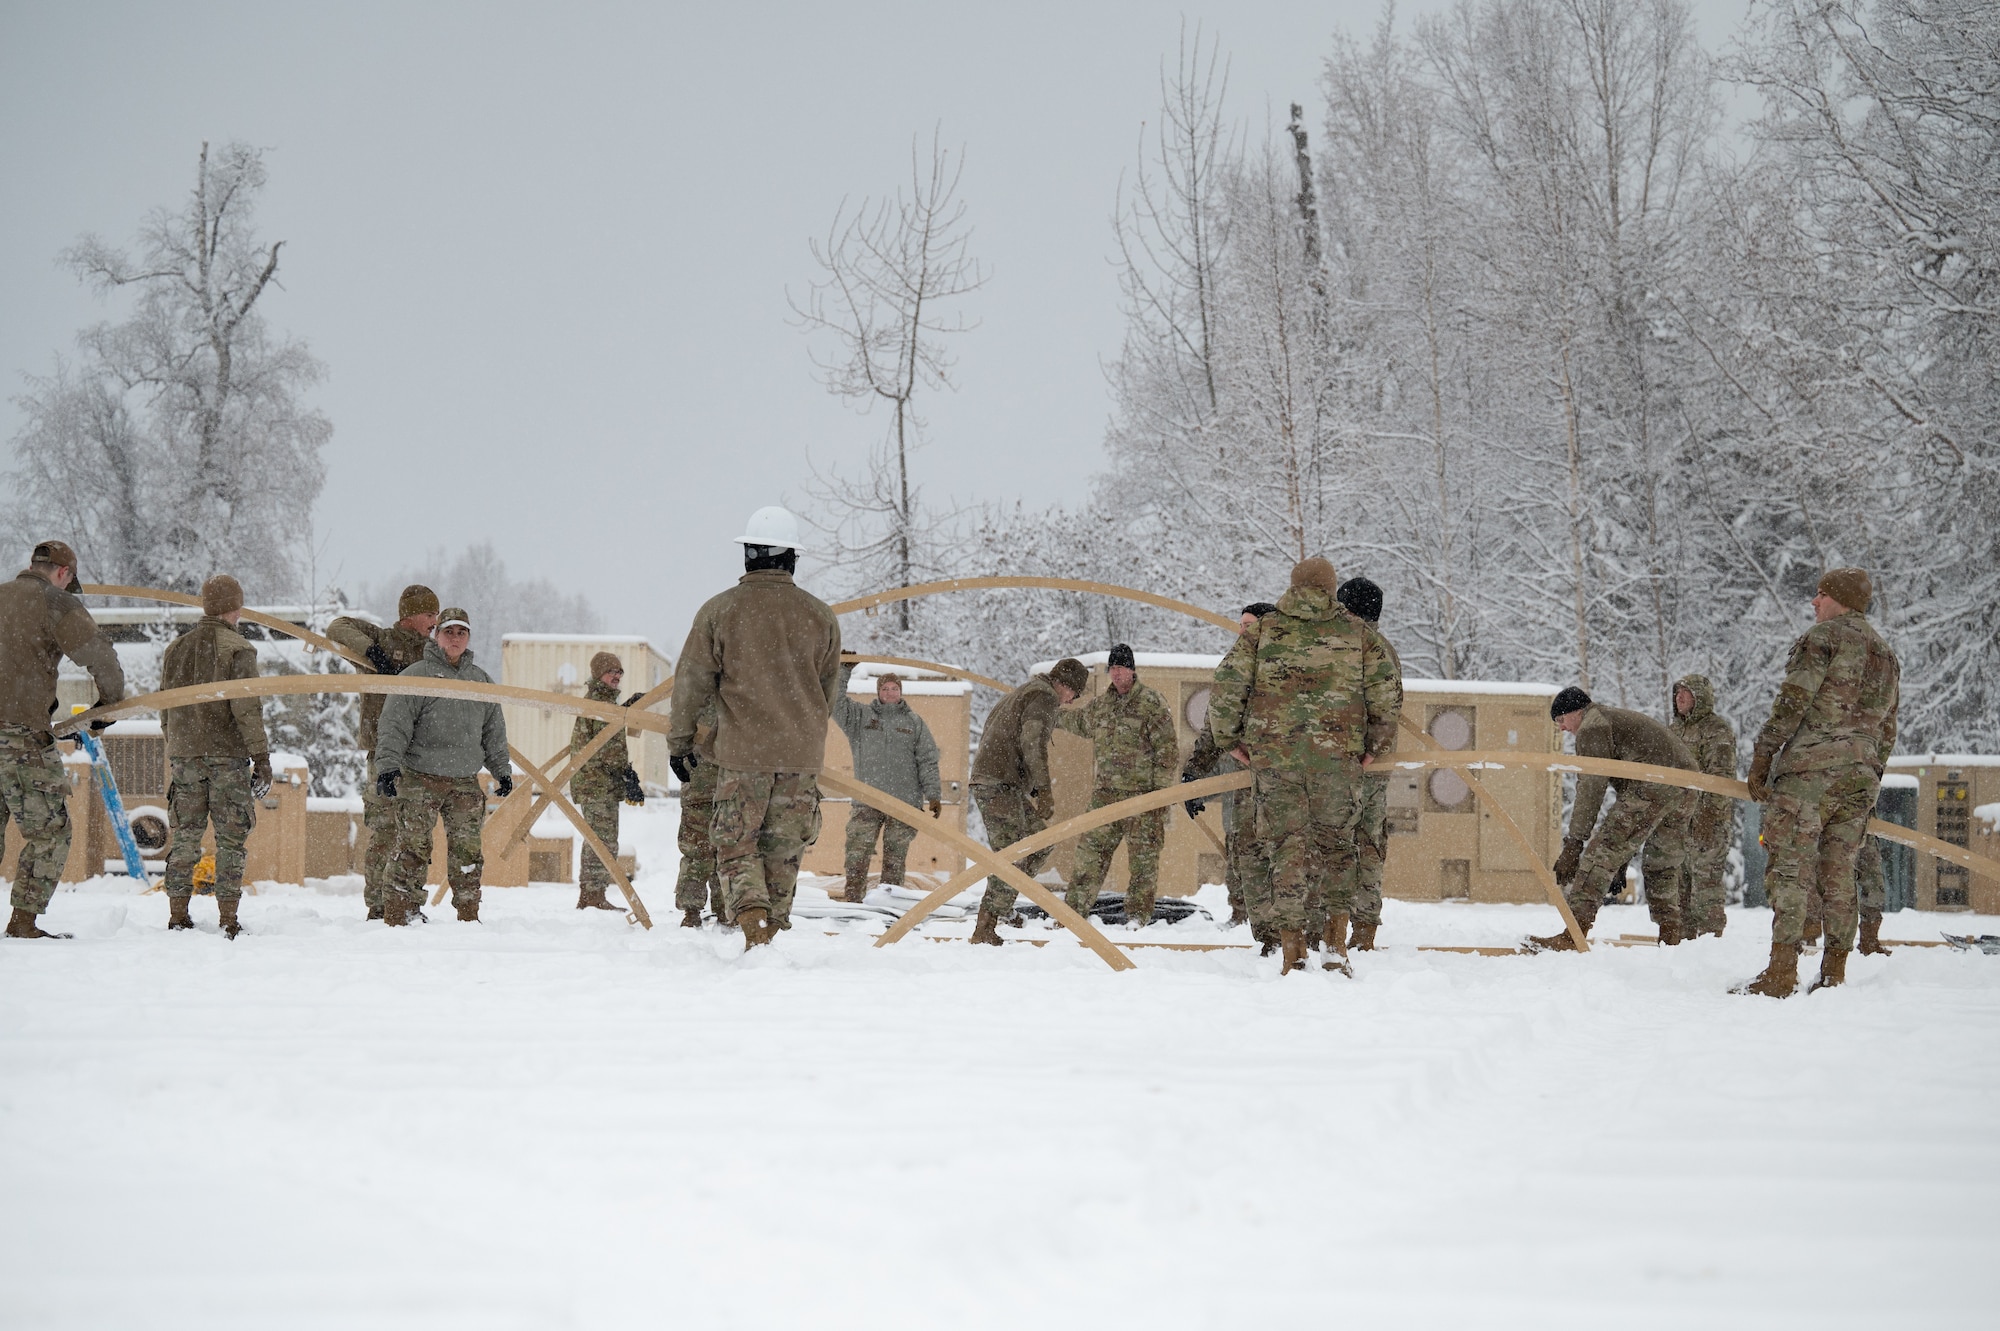 Polar Force is a training exercise designed to test JBER’s mission readiness as well as honing Airmen’s skills and techniques in a simulated expeditionary environment.